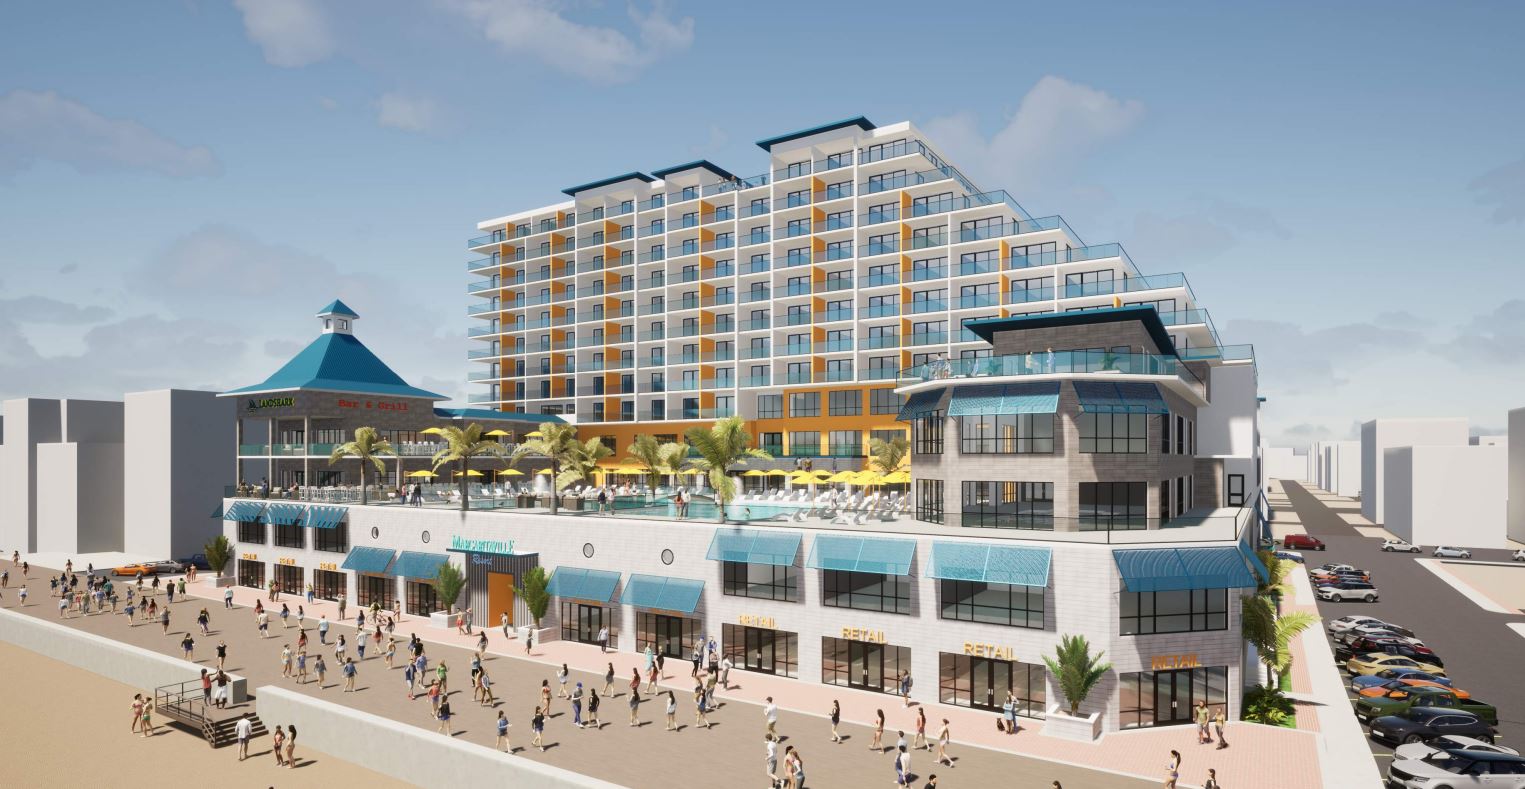 Although there is no official recommendation yet, the majority of the OC Planning Committee supports Margaritaville